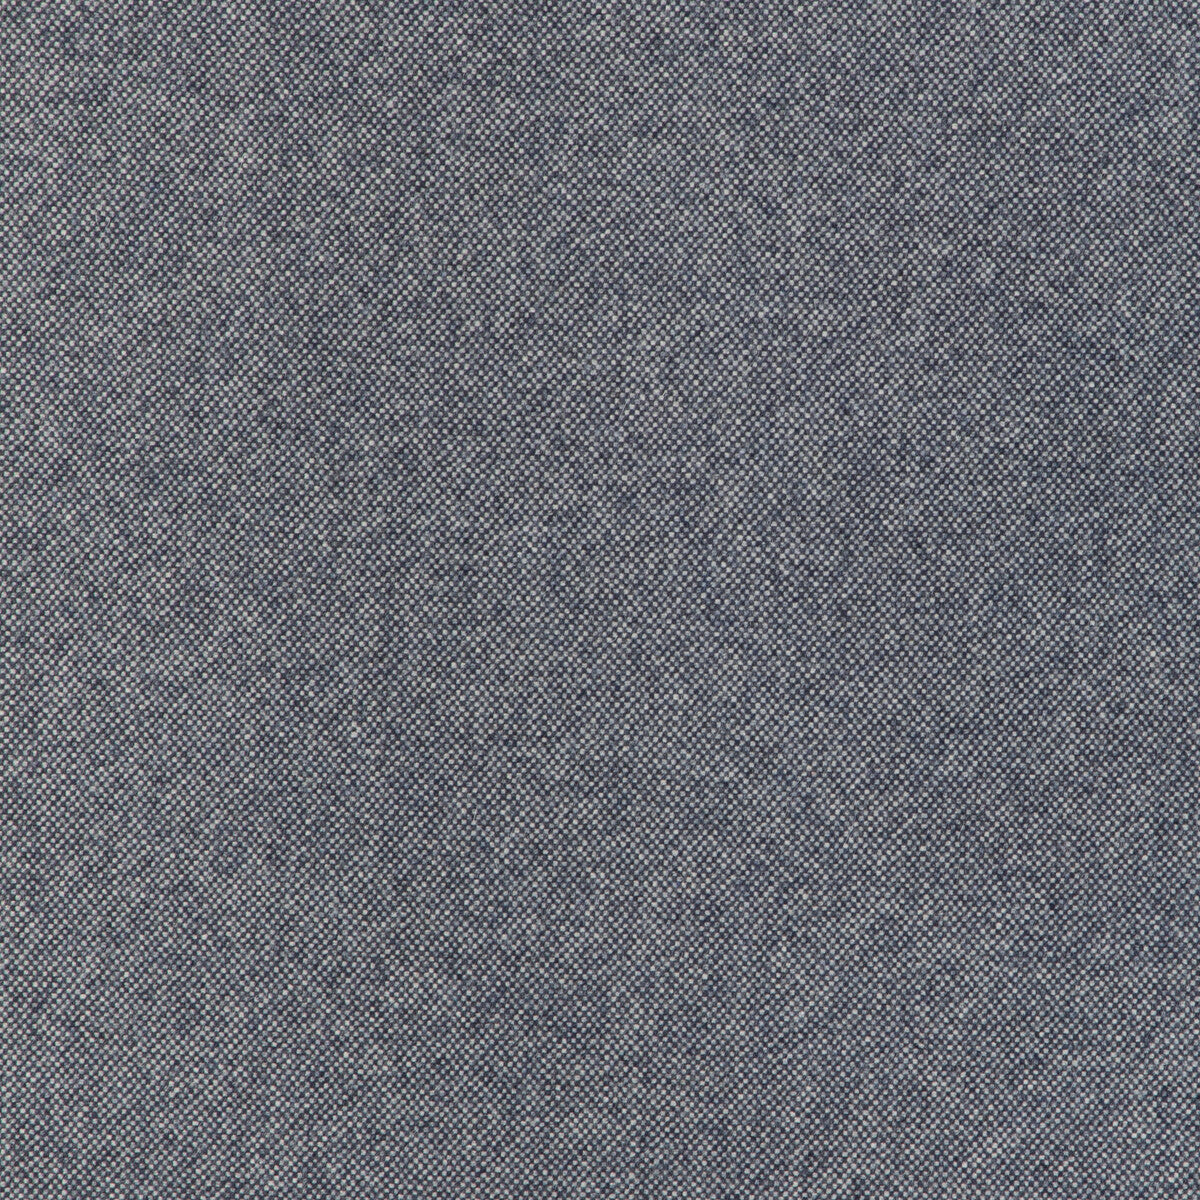 Manchester Wool fabric in ink color - pattern 37026.550.0 - by Kravet Contract